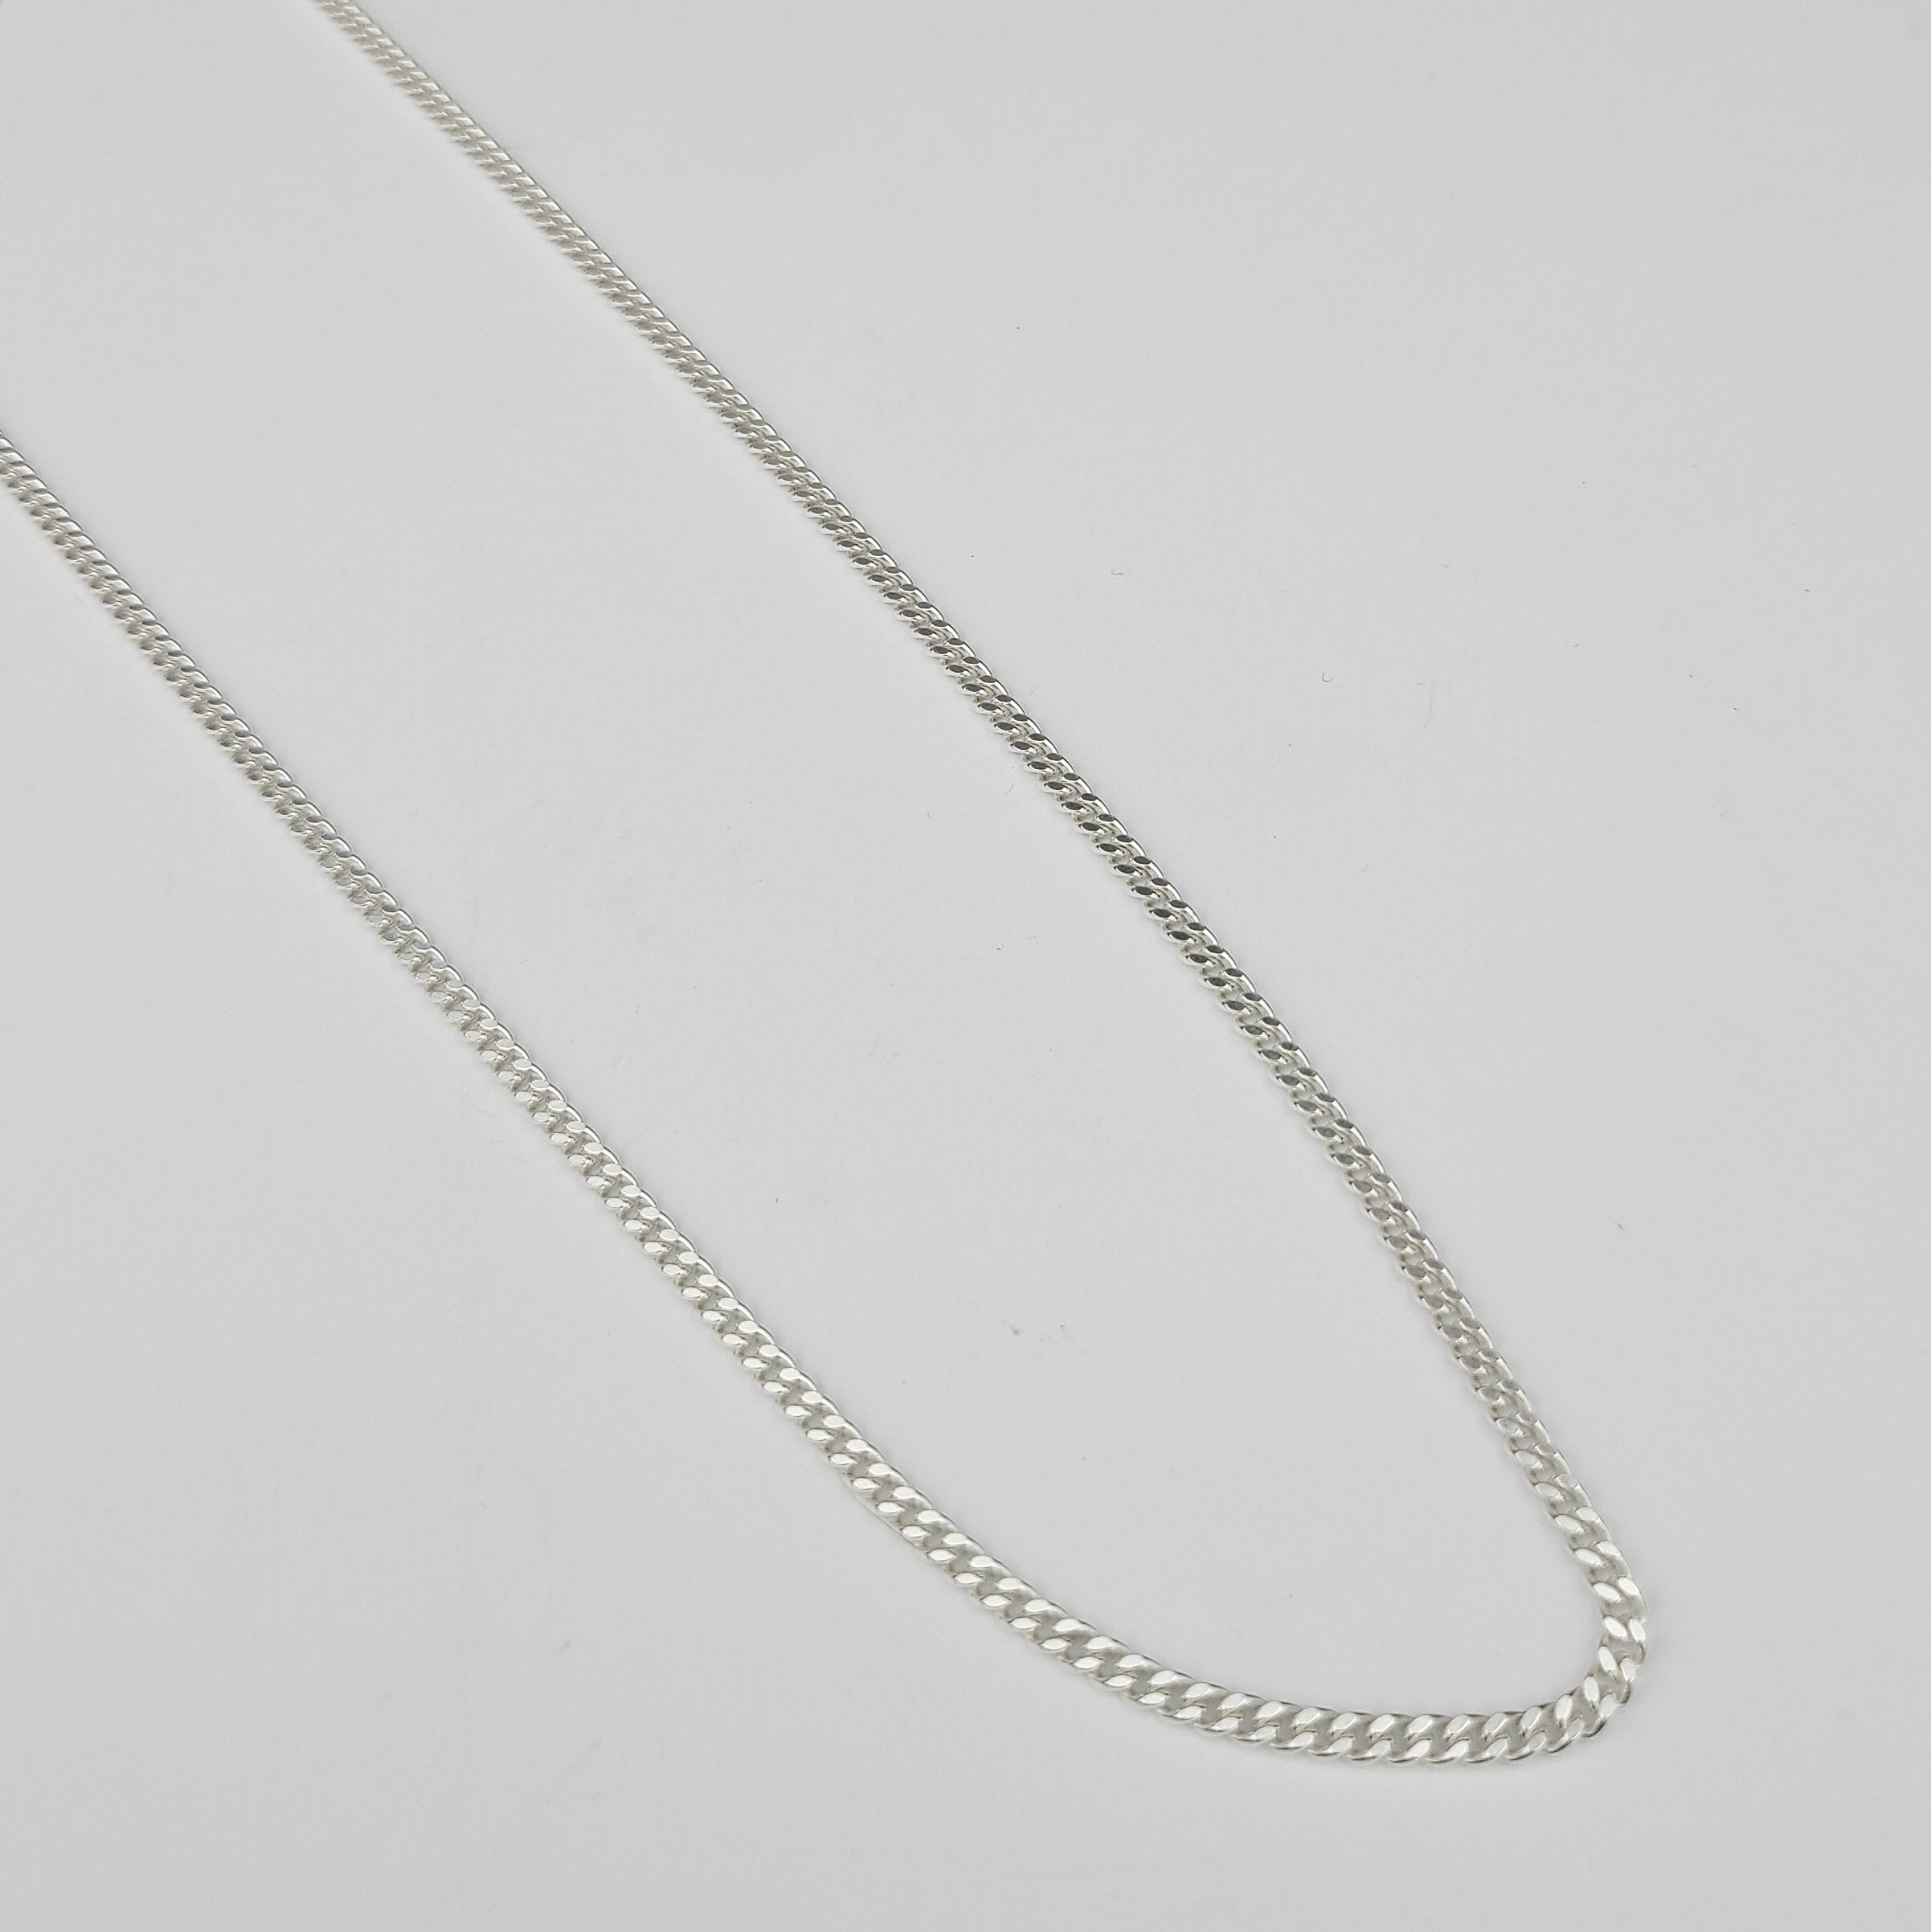 Bulky Thin 2.8mm Sterling Silver Chain Necklace